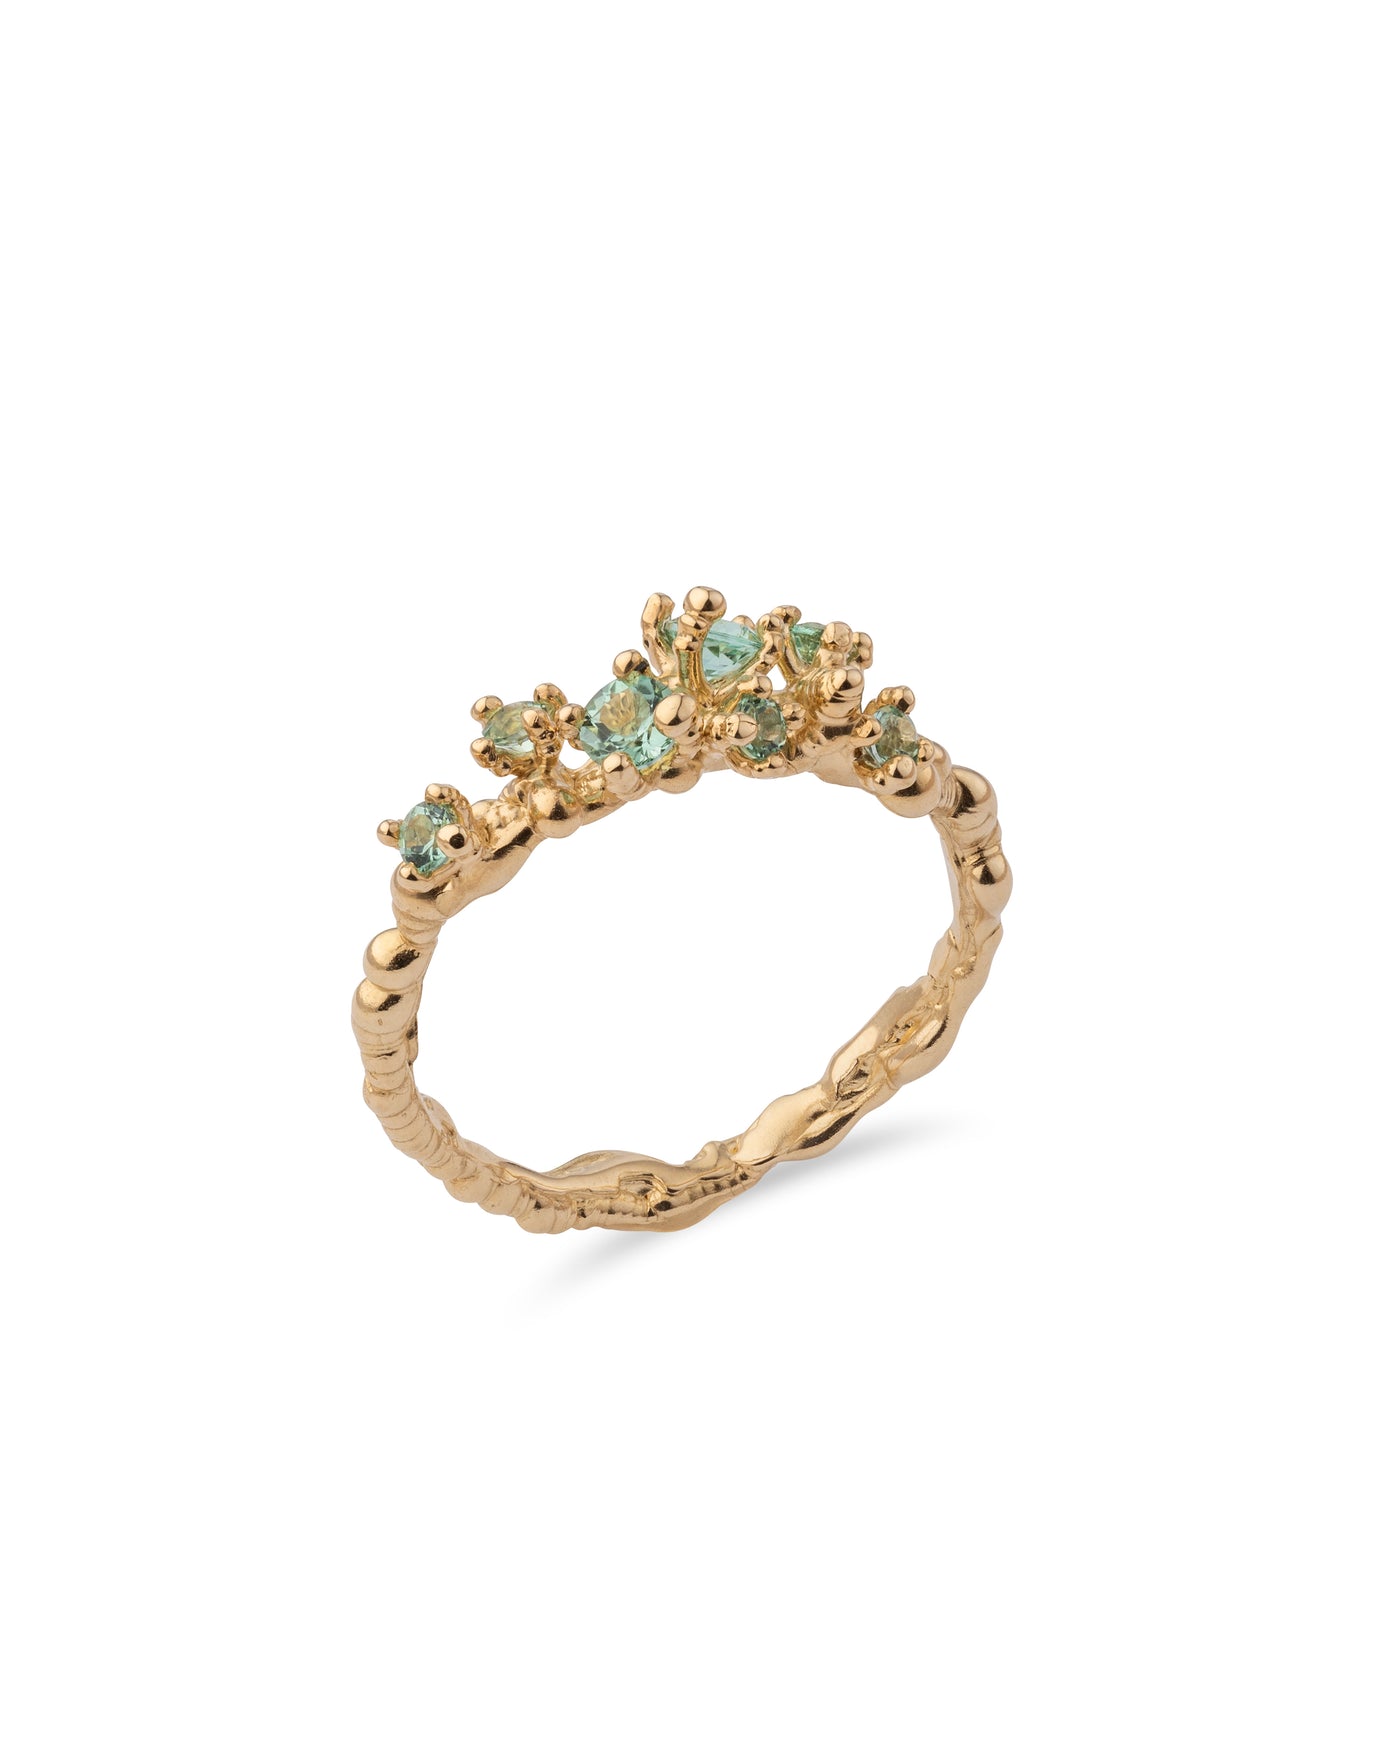 14 k yellow gold ring with tourmalines "---"